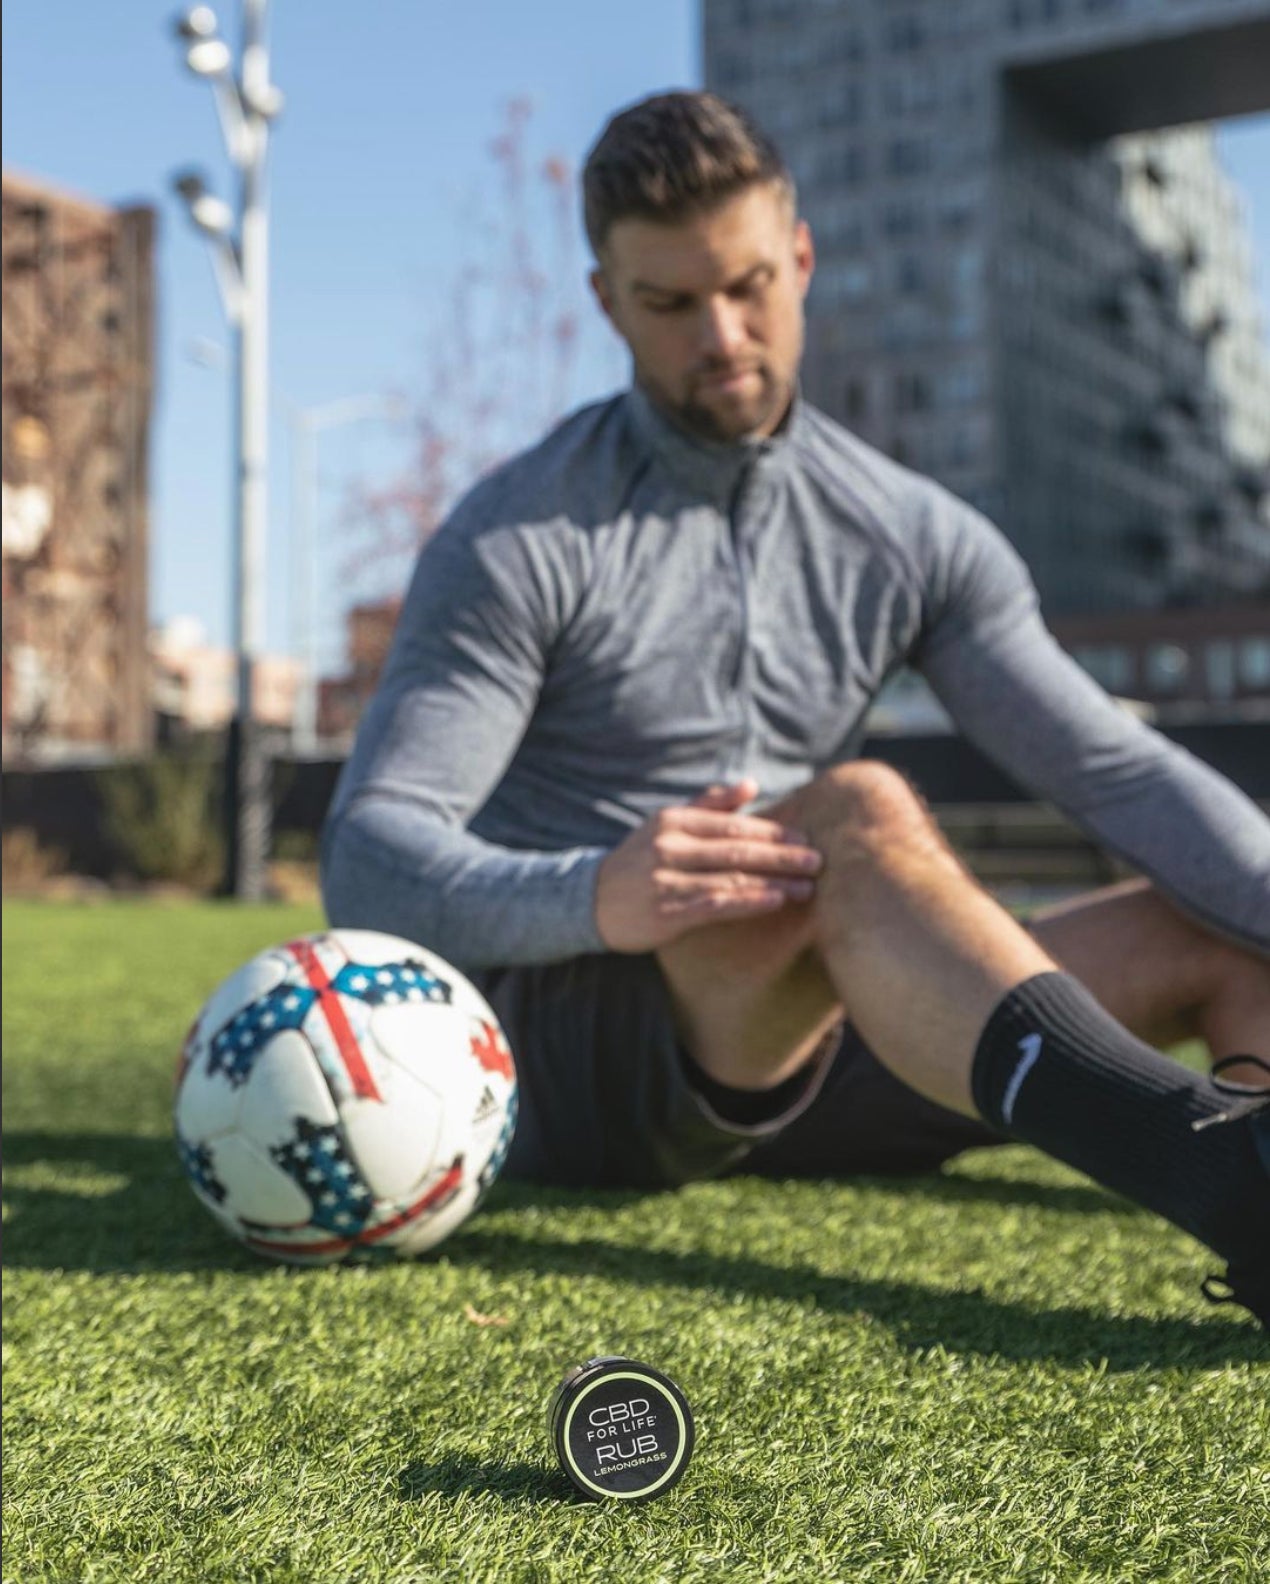 You focus on your workout. We’ll focus on making you feel 100 when you’re done with our best selling cbd topical balm for pain relief and muscle soreness.